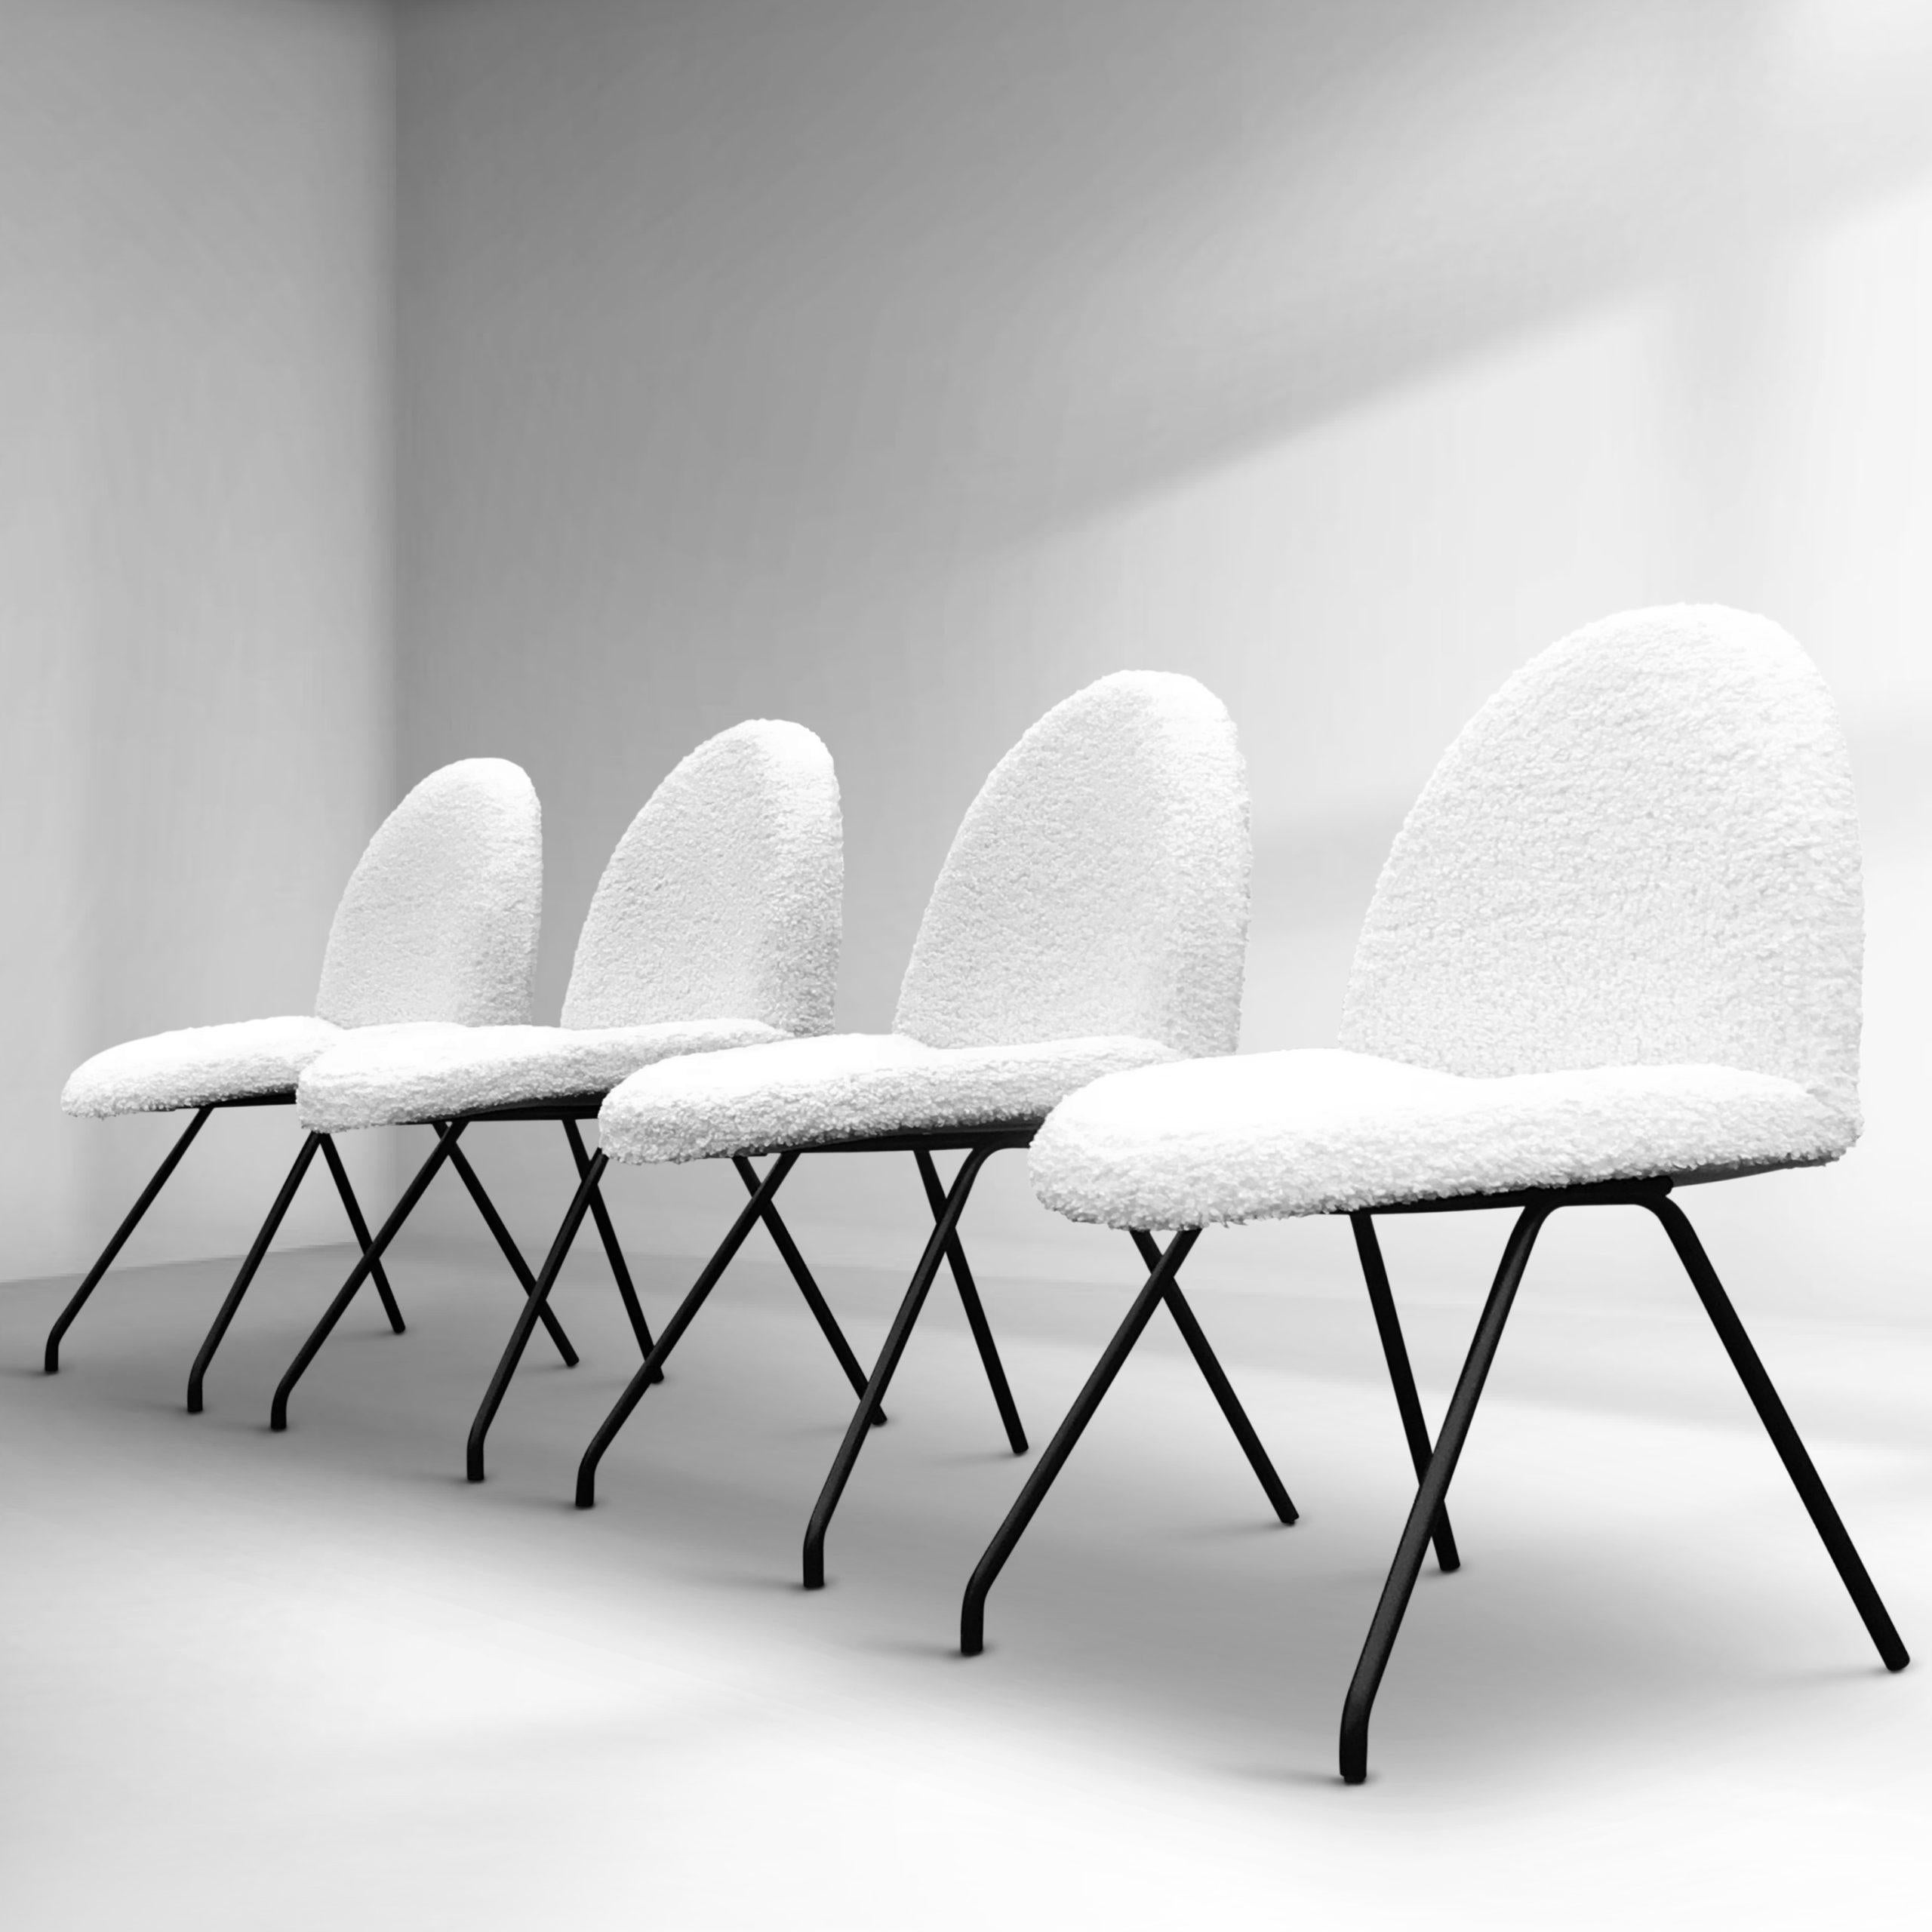 Set of infamous Language dining chairs by the French grandmaster of design Joseph André Motte, also known as “Tongue” chairs, due to the unmistakable shape of the seat.

These chairs were designed in 1954 by Joseph André Motte for Steiner France, as